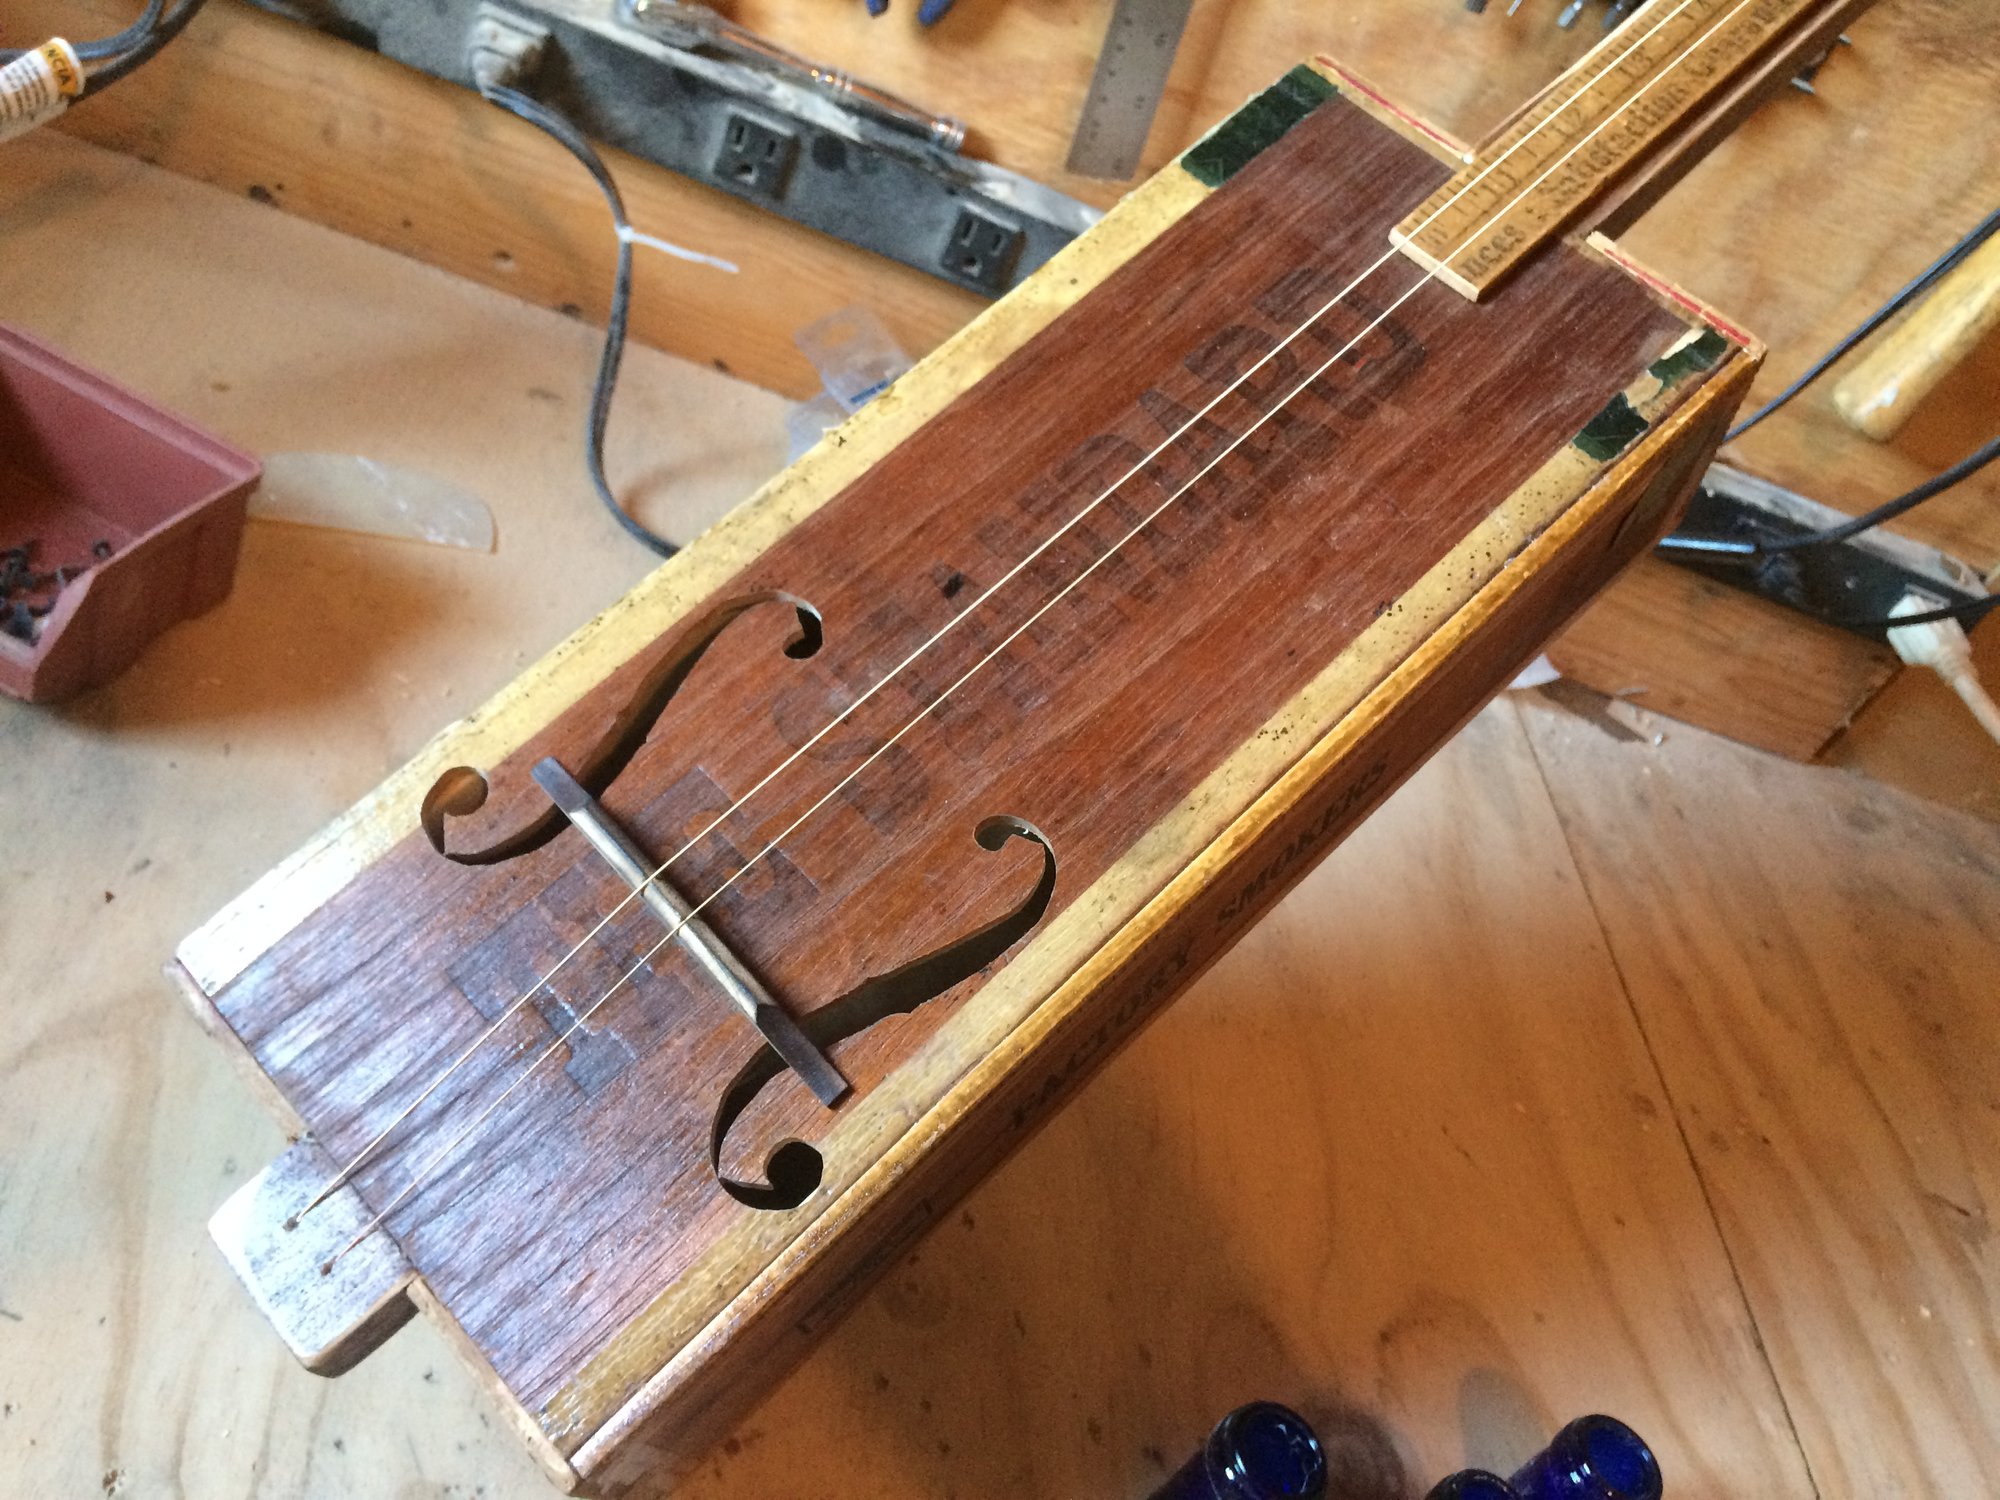 This guitar is made from a century-old cigar box